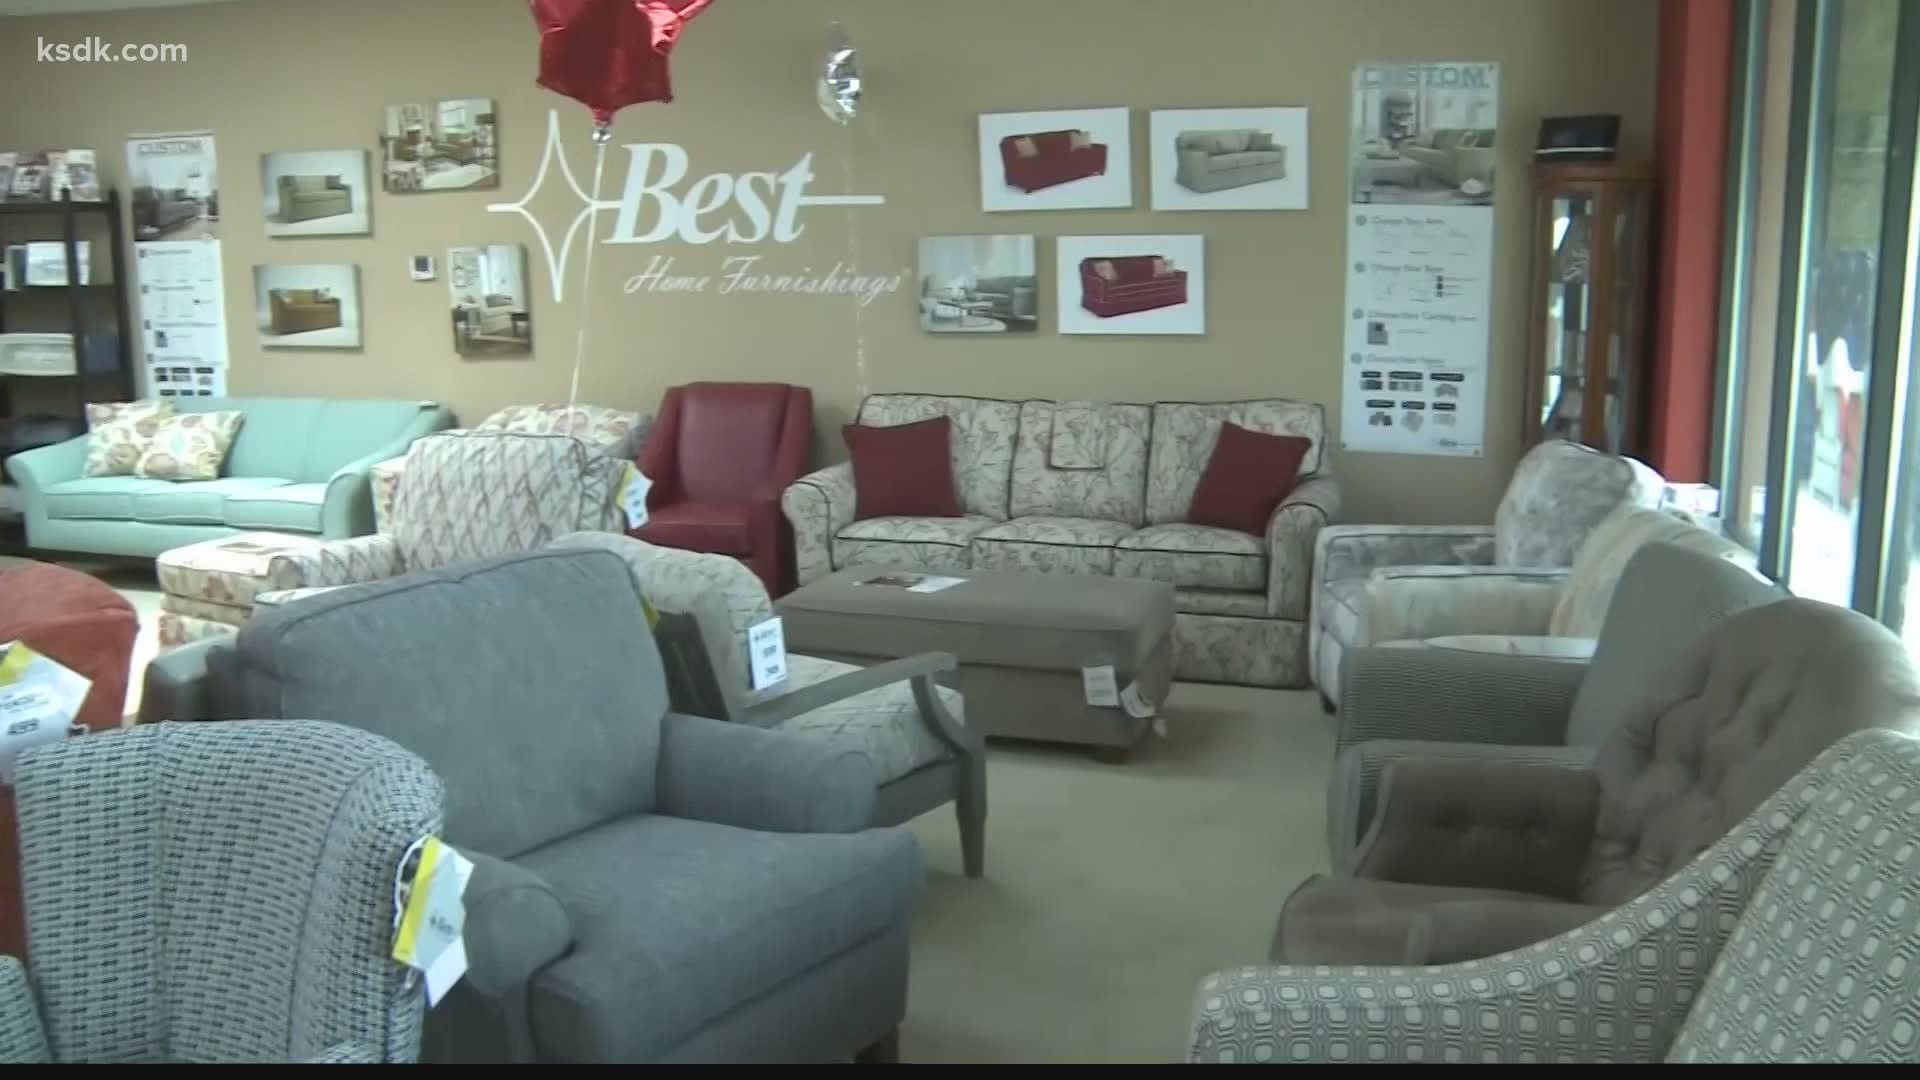 Visit the Best Home Furnishings showroom to see all they have to offer.